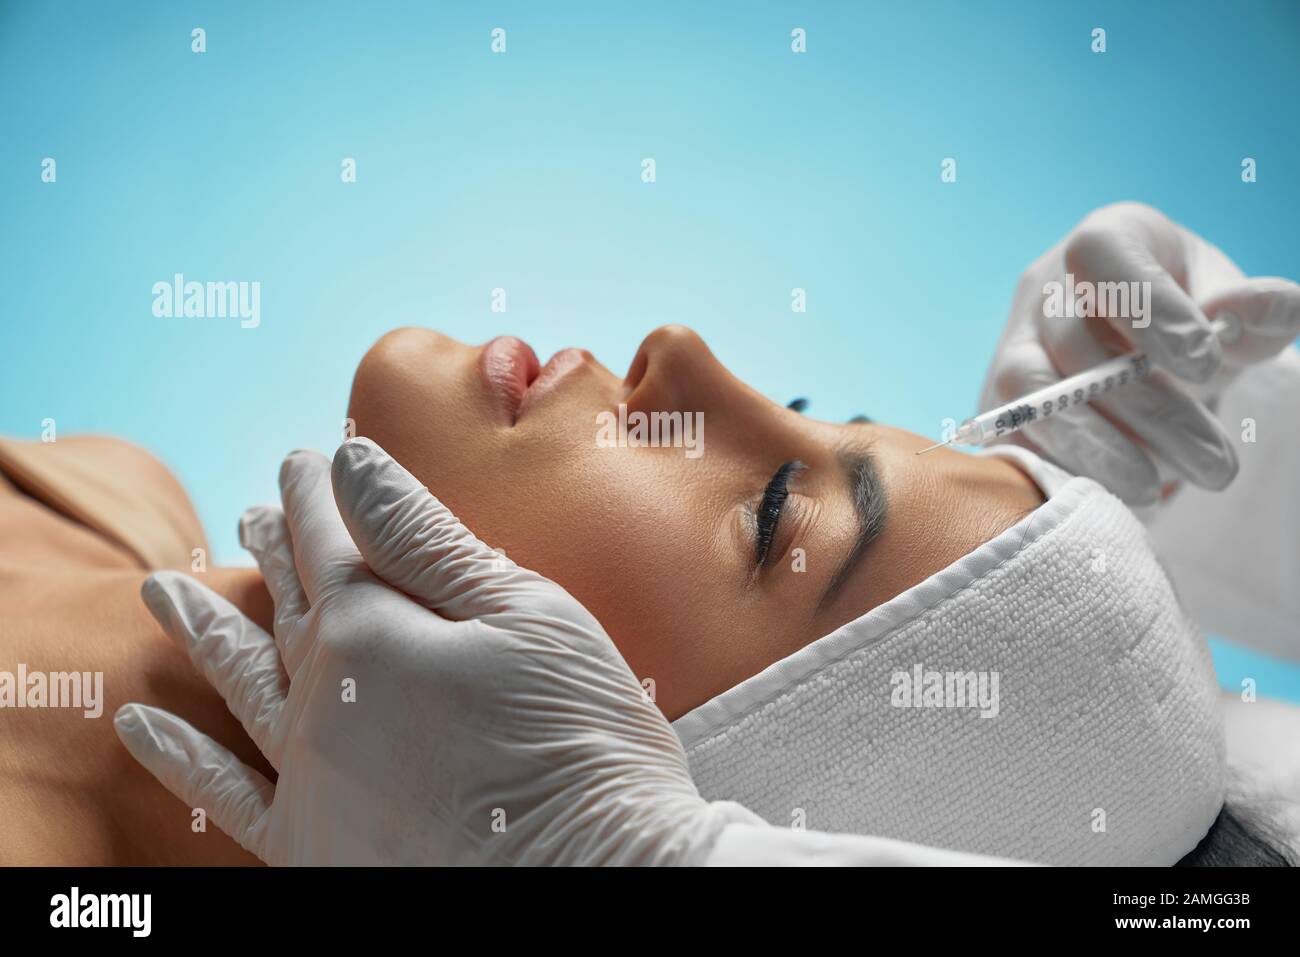 Close up of botox injection in female forehead. Side view of cosmetologist using syringe with special liquid, holding chin while patient with towel on head lying. Concept of cosmetology, beauty. Stock Photo